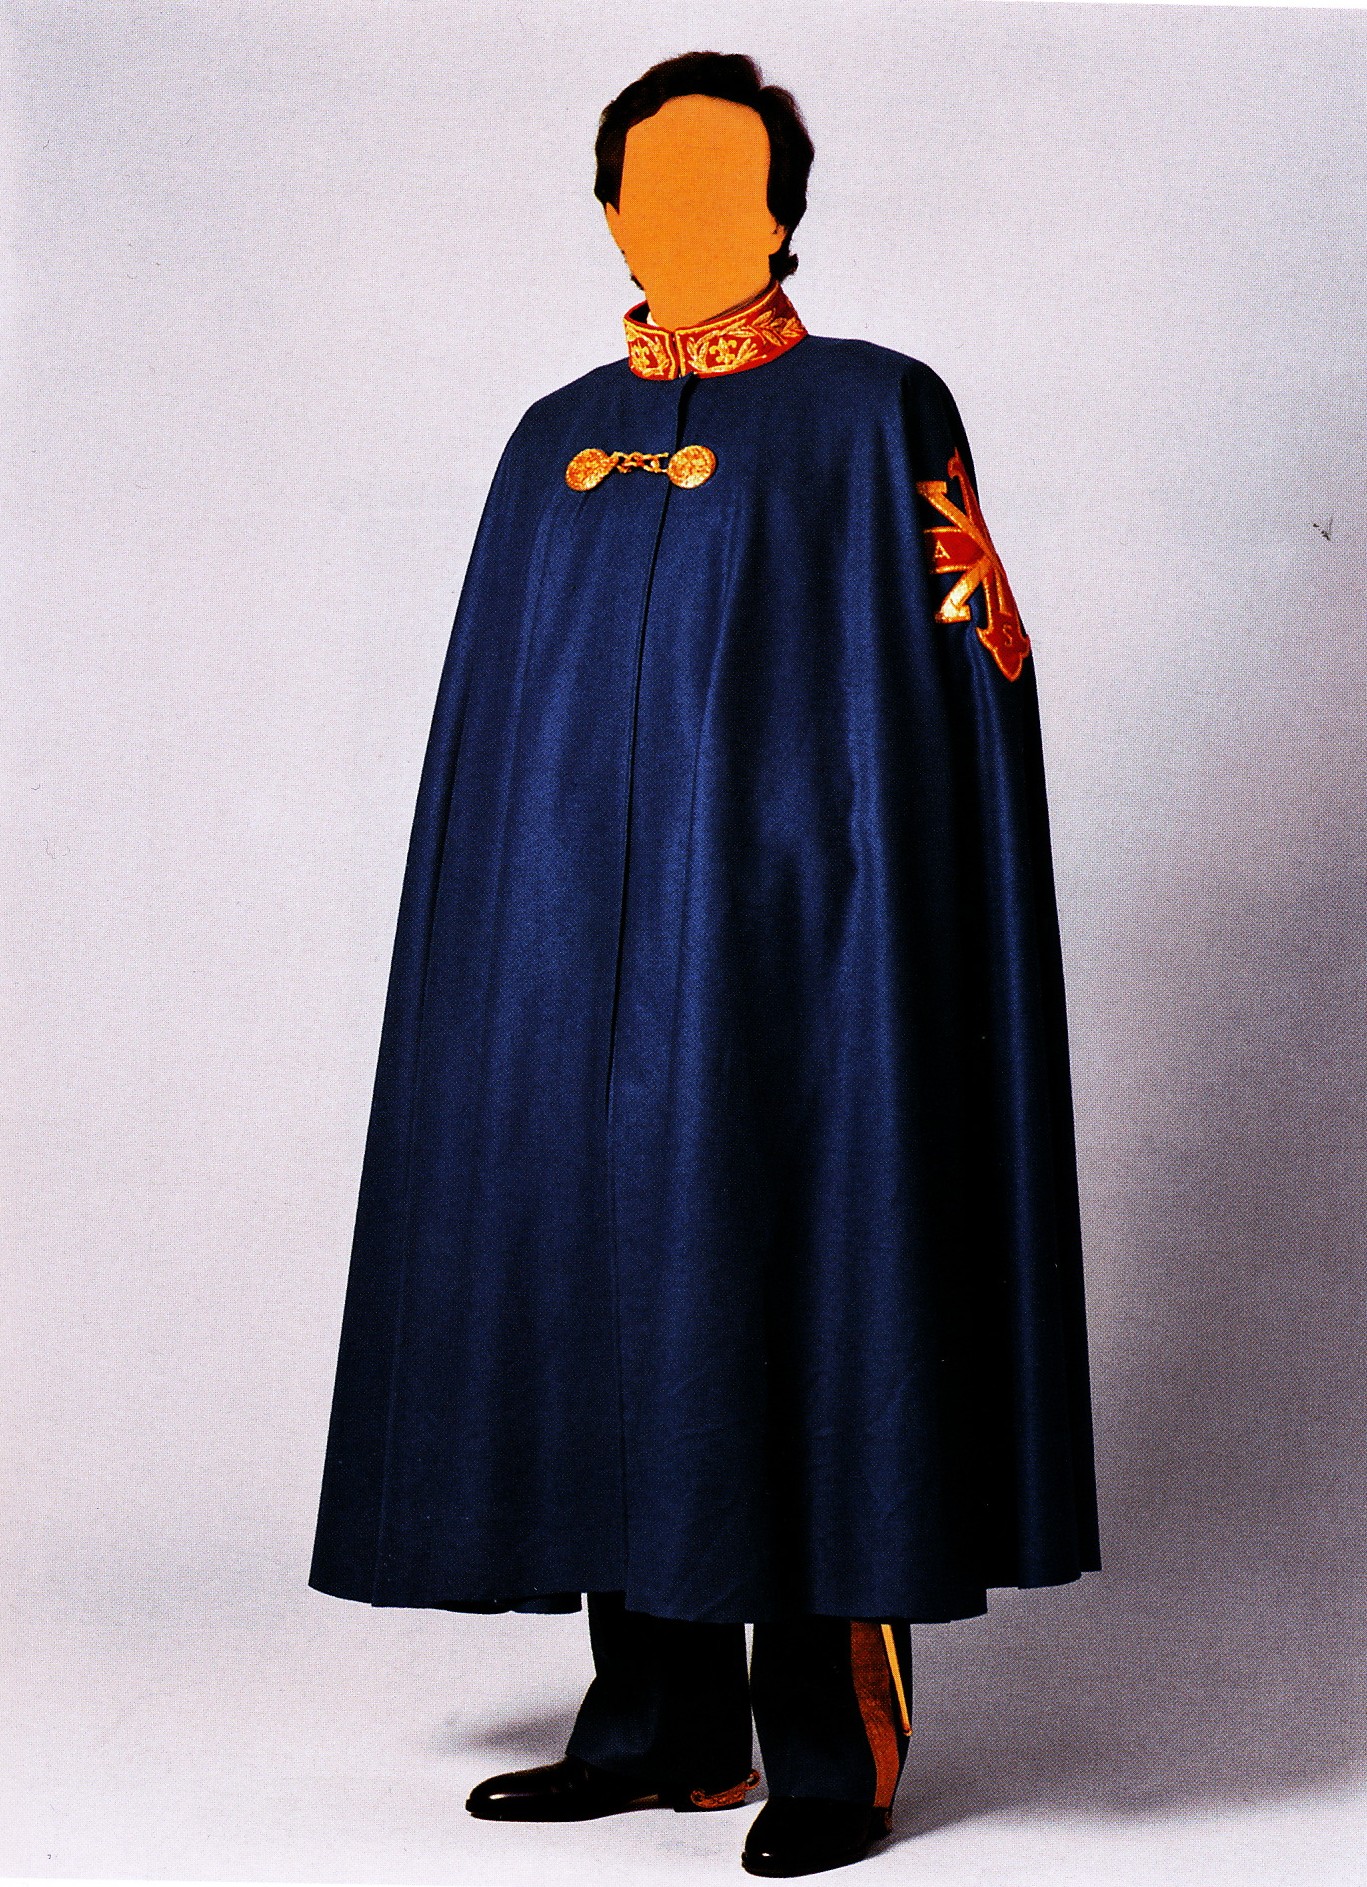 Mantle Cape of the Order